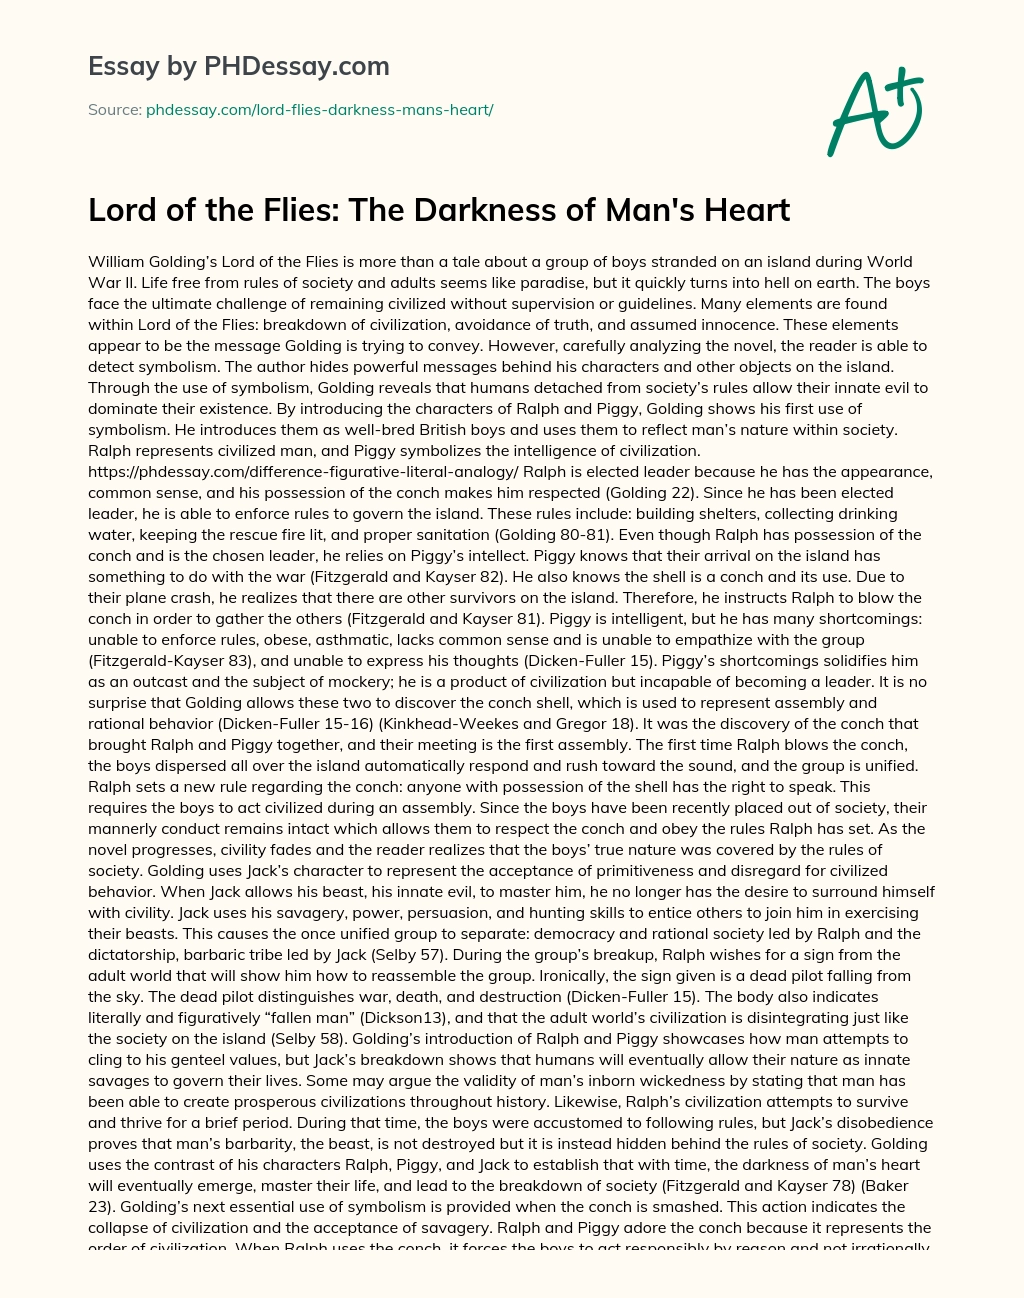 Lord of the Flies: The Darkness of Man’s Heart essay